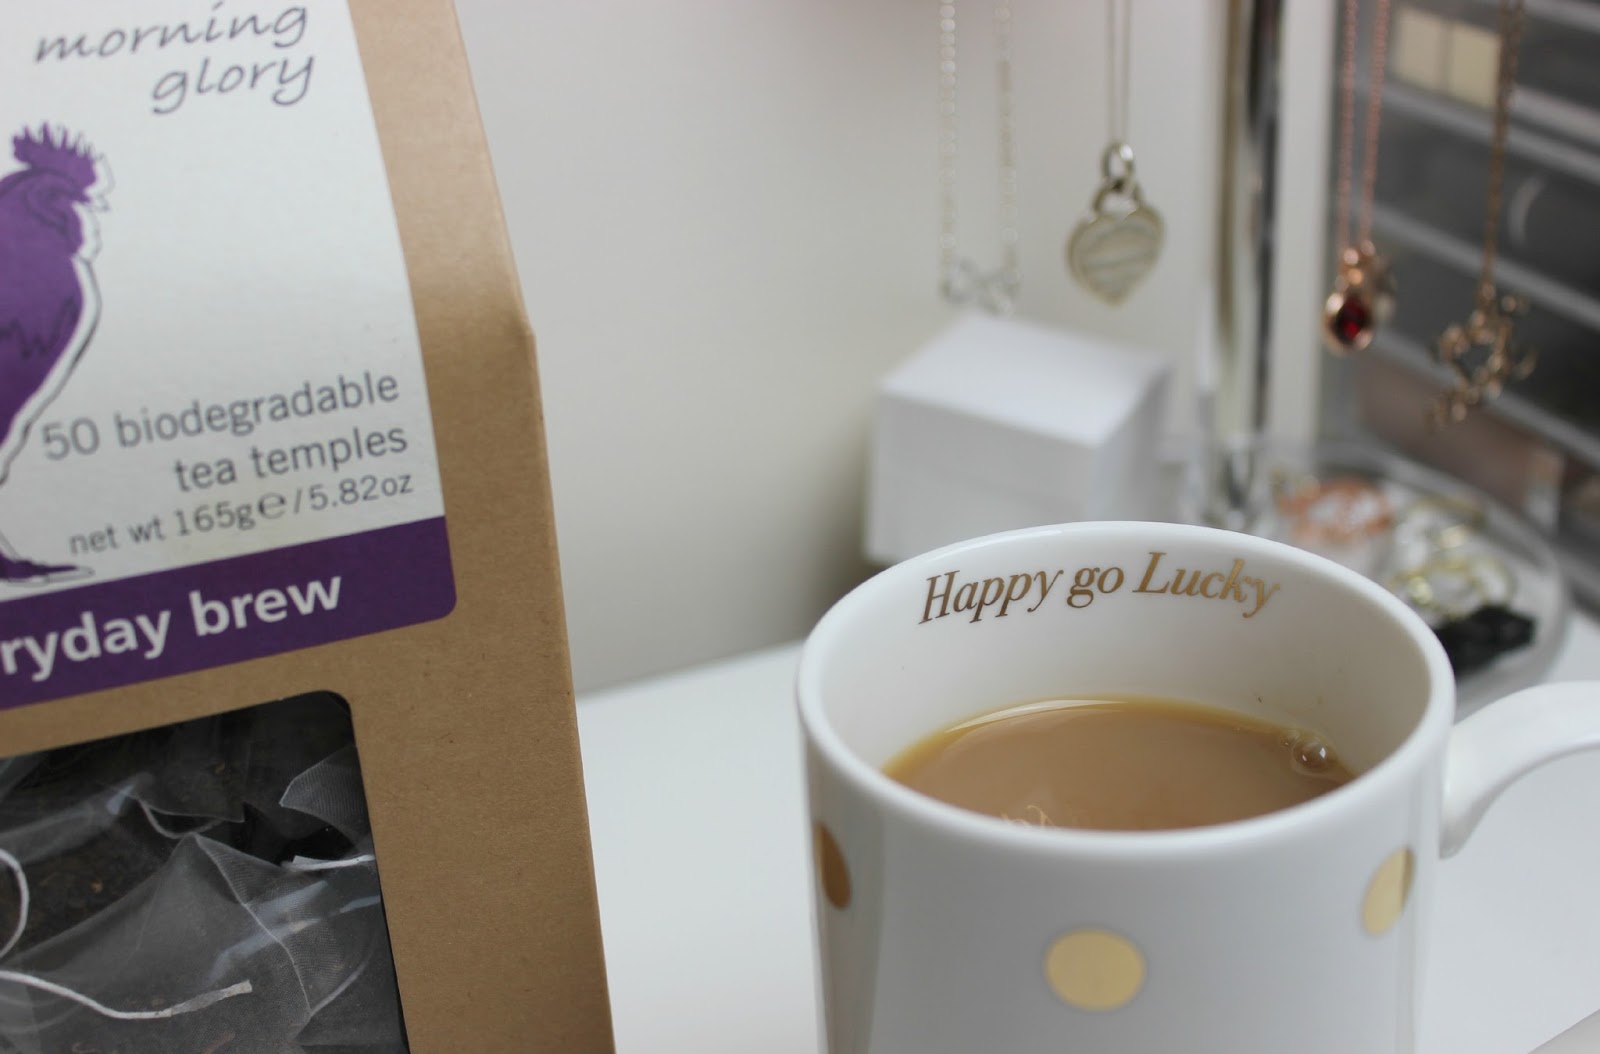 A picture of Teapigs Morning Glory Everyday Brew